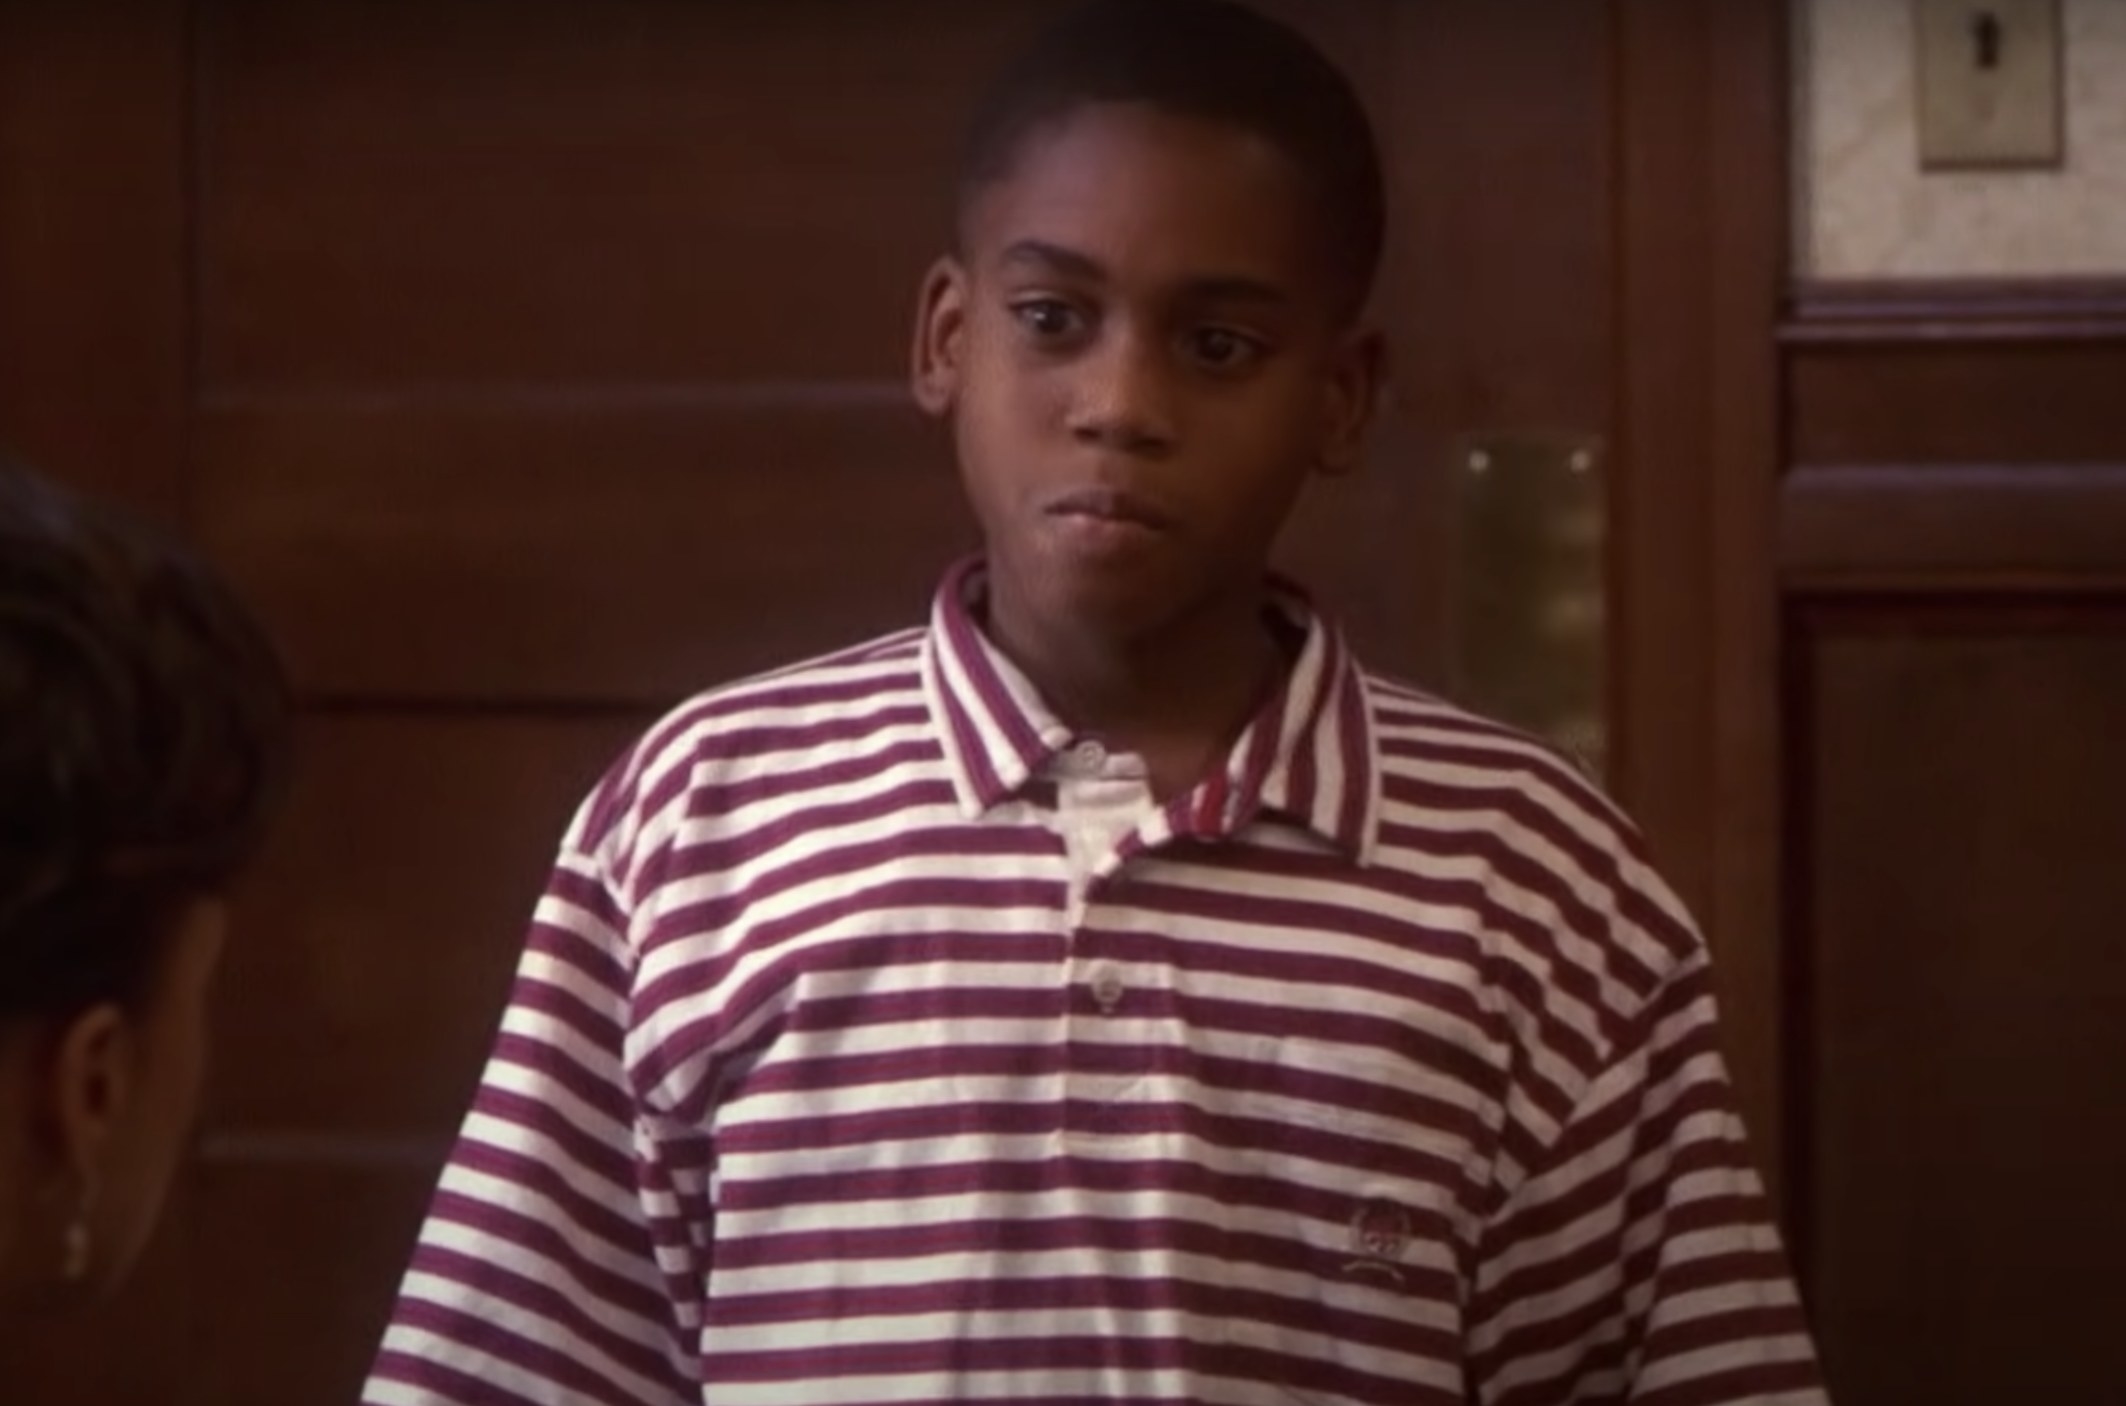 Actor Brandon Hammond is a little boy wearing a red and white striped shirt. He frowns and looks very upset.